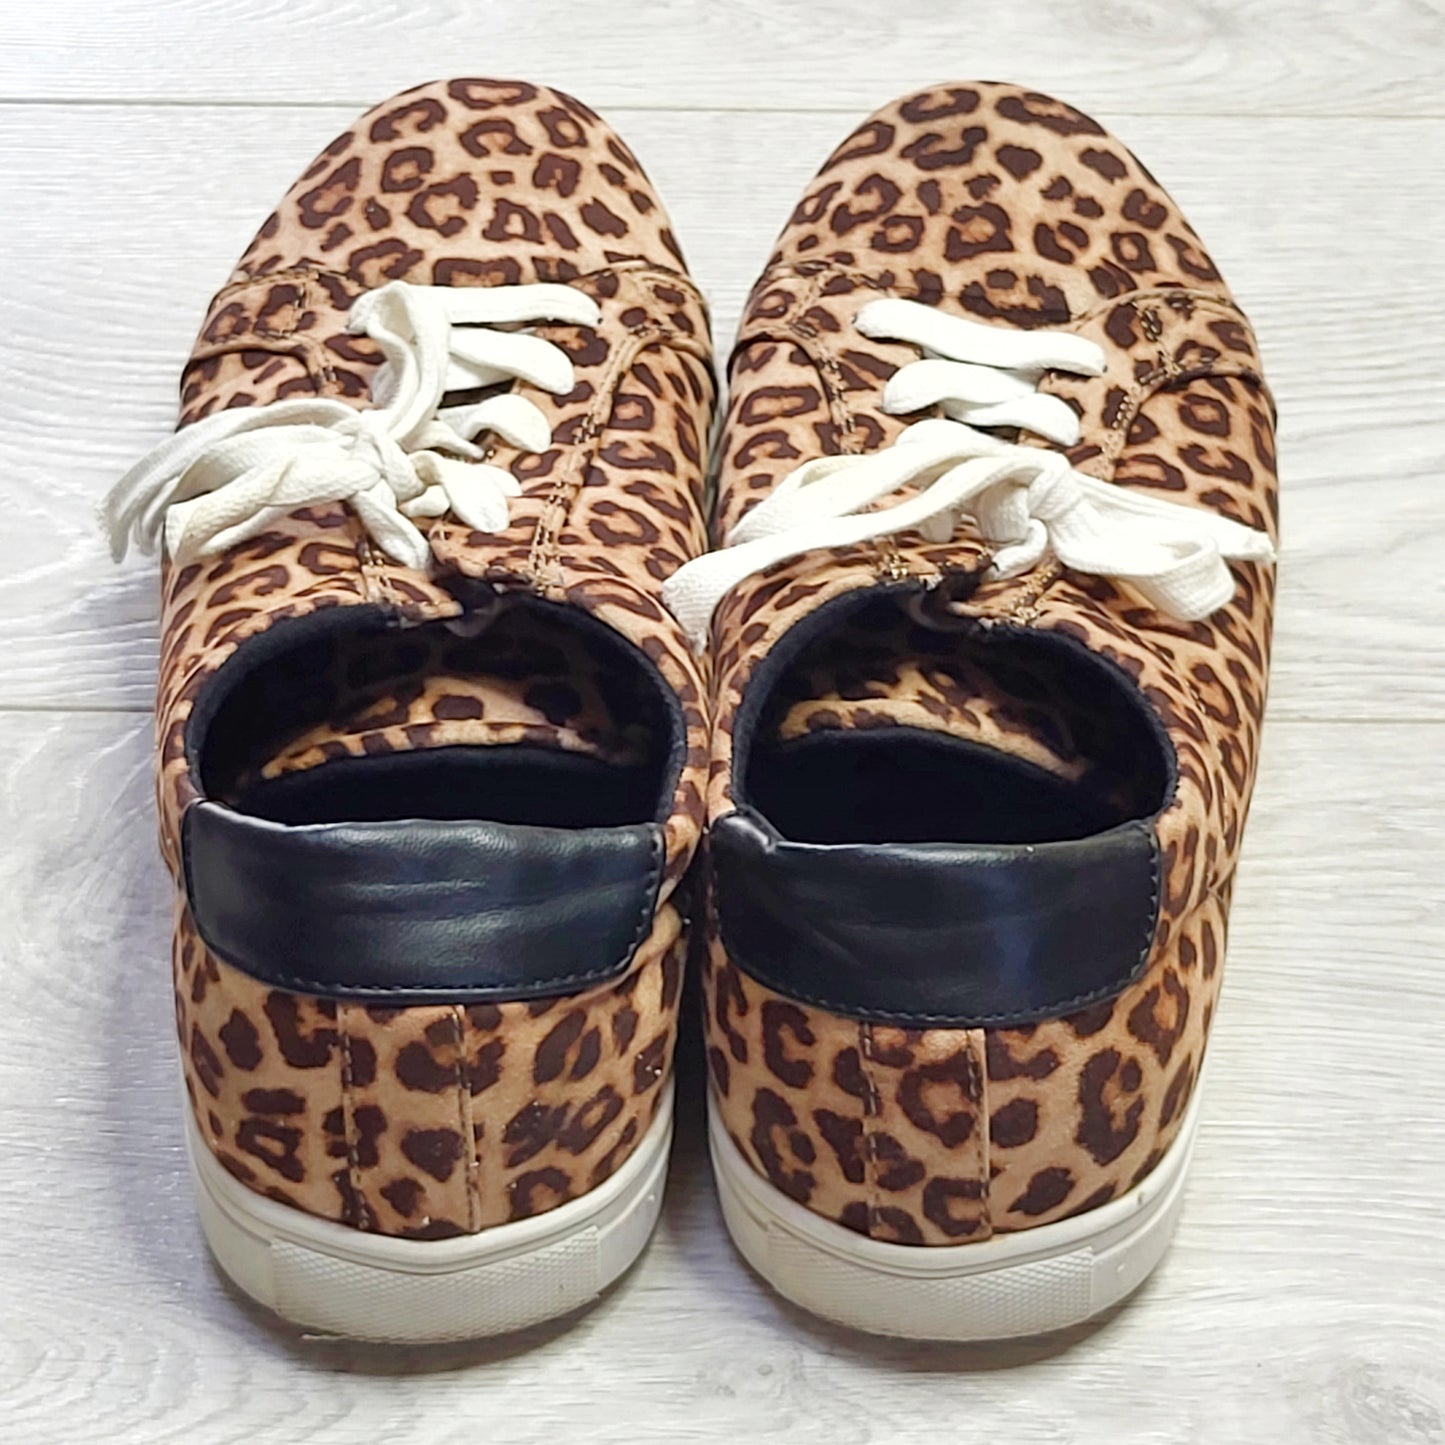 House of Harlow leopard print shoes, size 10, good condition